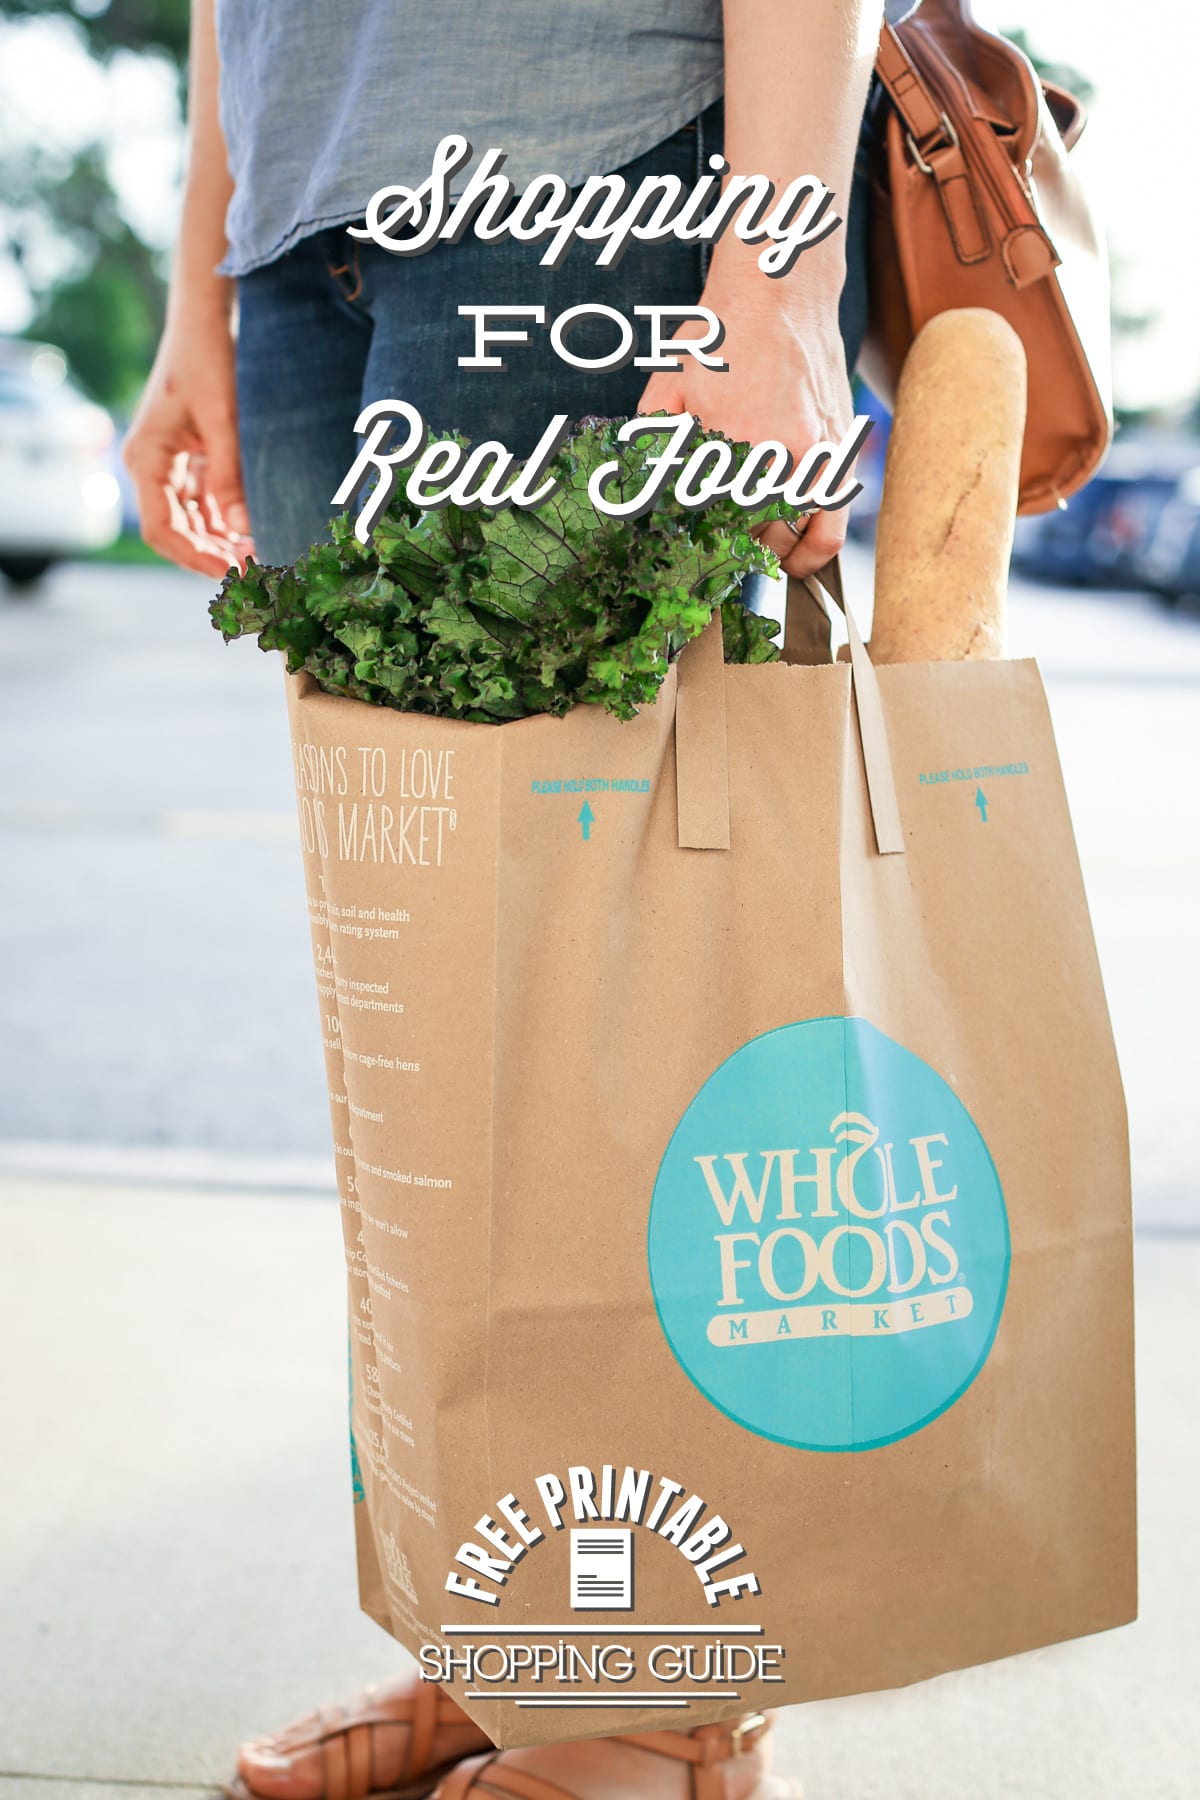 Shopping for Real Food at Whole Foods: My Top Picks + Printable Shopping Guide